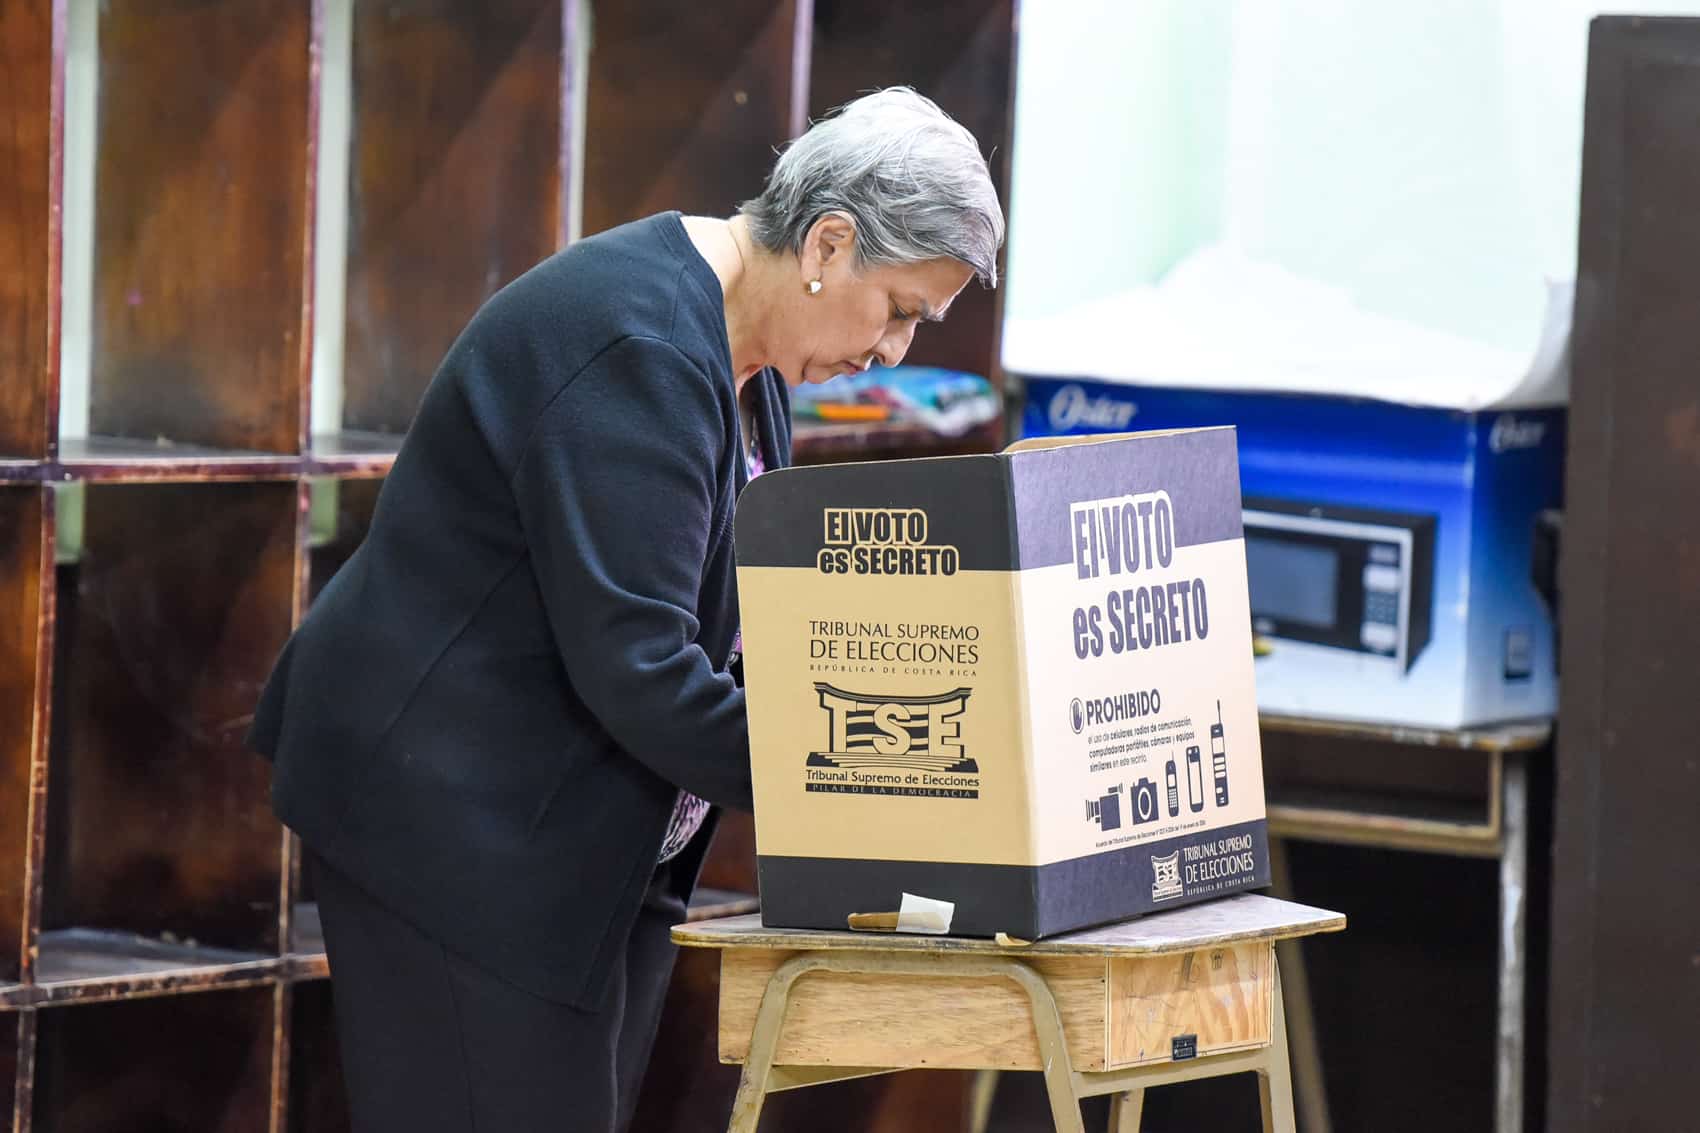 A woman votes in Costa Rica's Municipal Elections in February 2016.